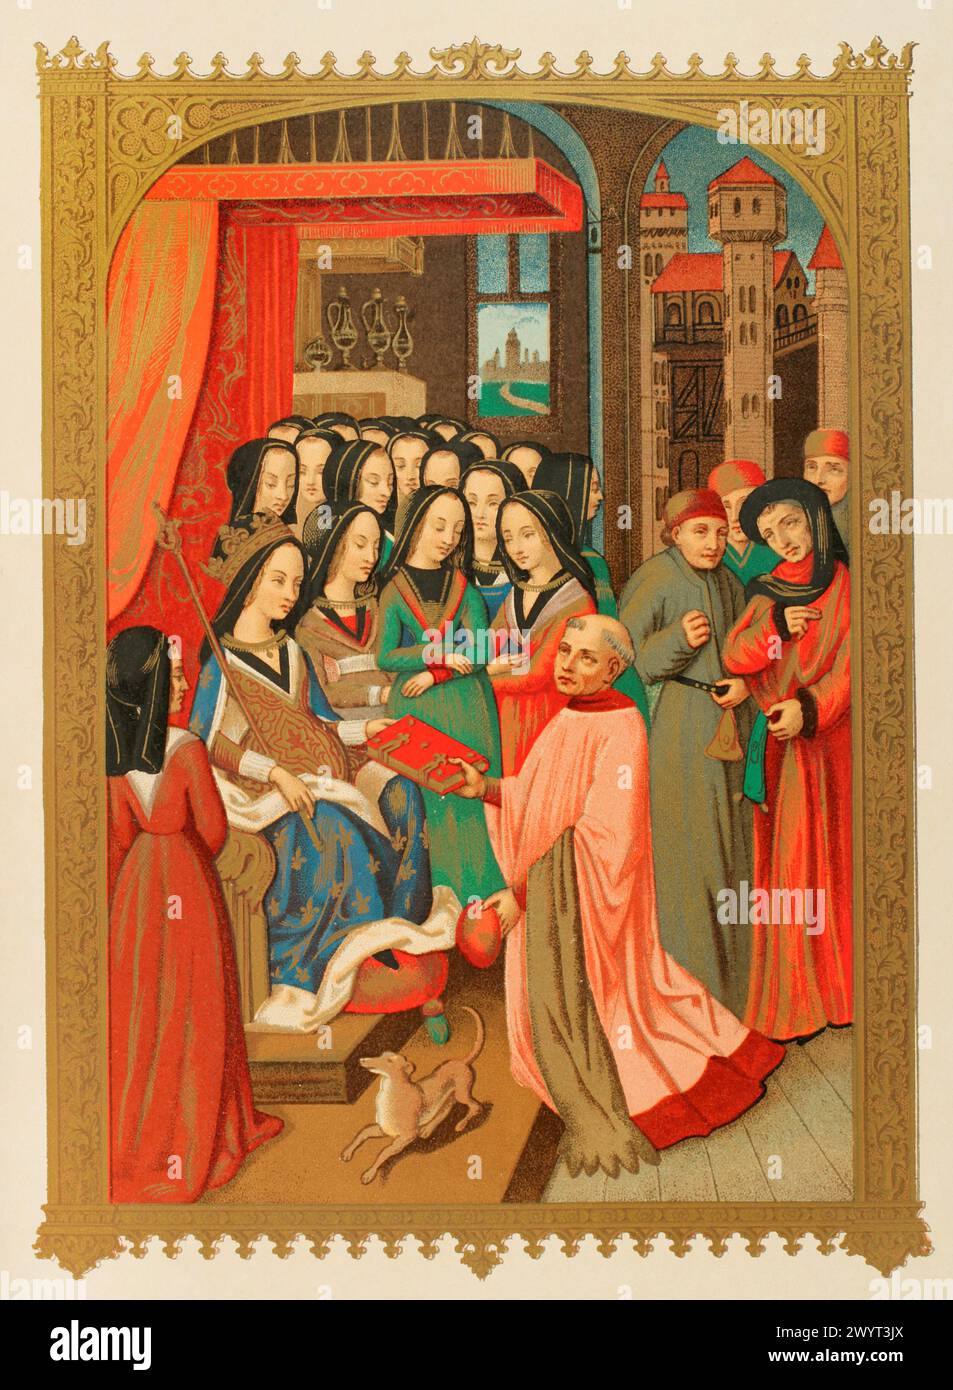 Marie of Anjou (1404-1463). Queen consort of France (1422-1461). The Court of Ladies of Marie of Anjou, wife of Charles VII. His chaplain, the scholar Robert Blondel, presents to her the allegorical treatise of the “Twelve Perils of Hell” which he composed for her, 1455. Chromolithography from a miniature of that book. 'Moeurs, usages et costumes au moyen-âge et à l'époque de la Renaissance', by Paul Lacroix. Paris, 1878. Stock Photo